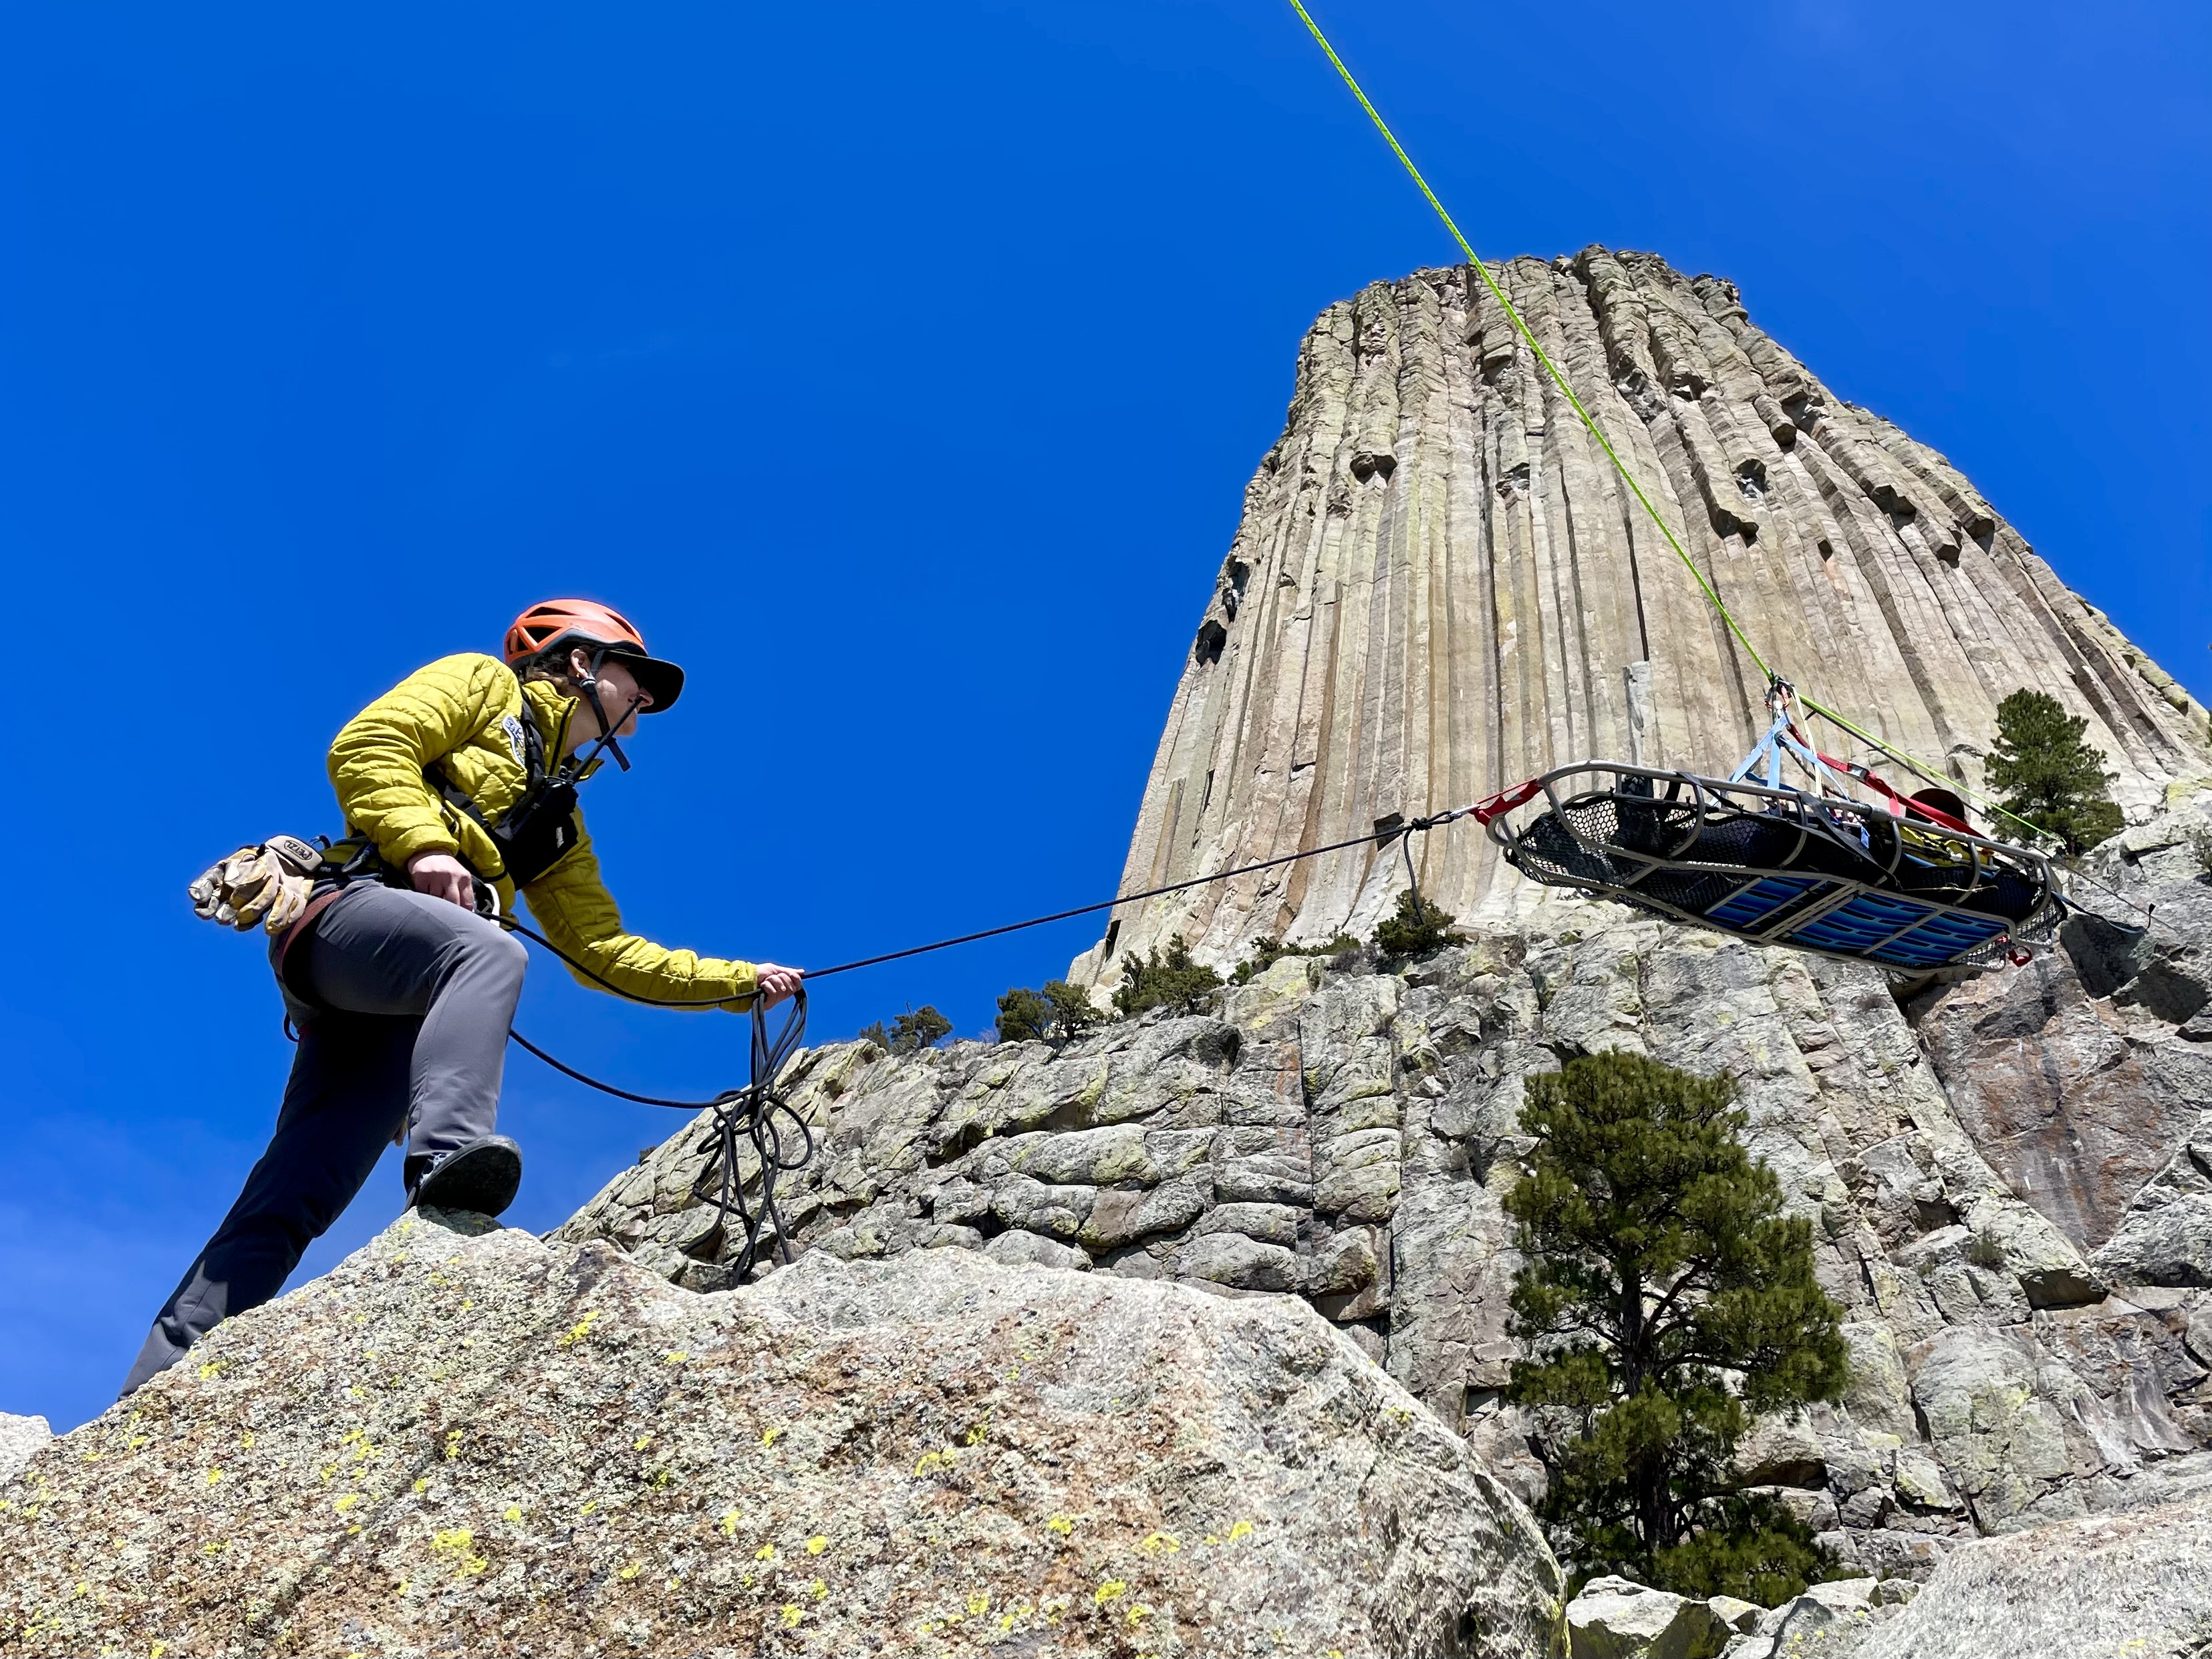 Person in yellowjacket holding rope with litter attached with devils tower in background on a blue sky day